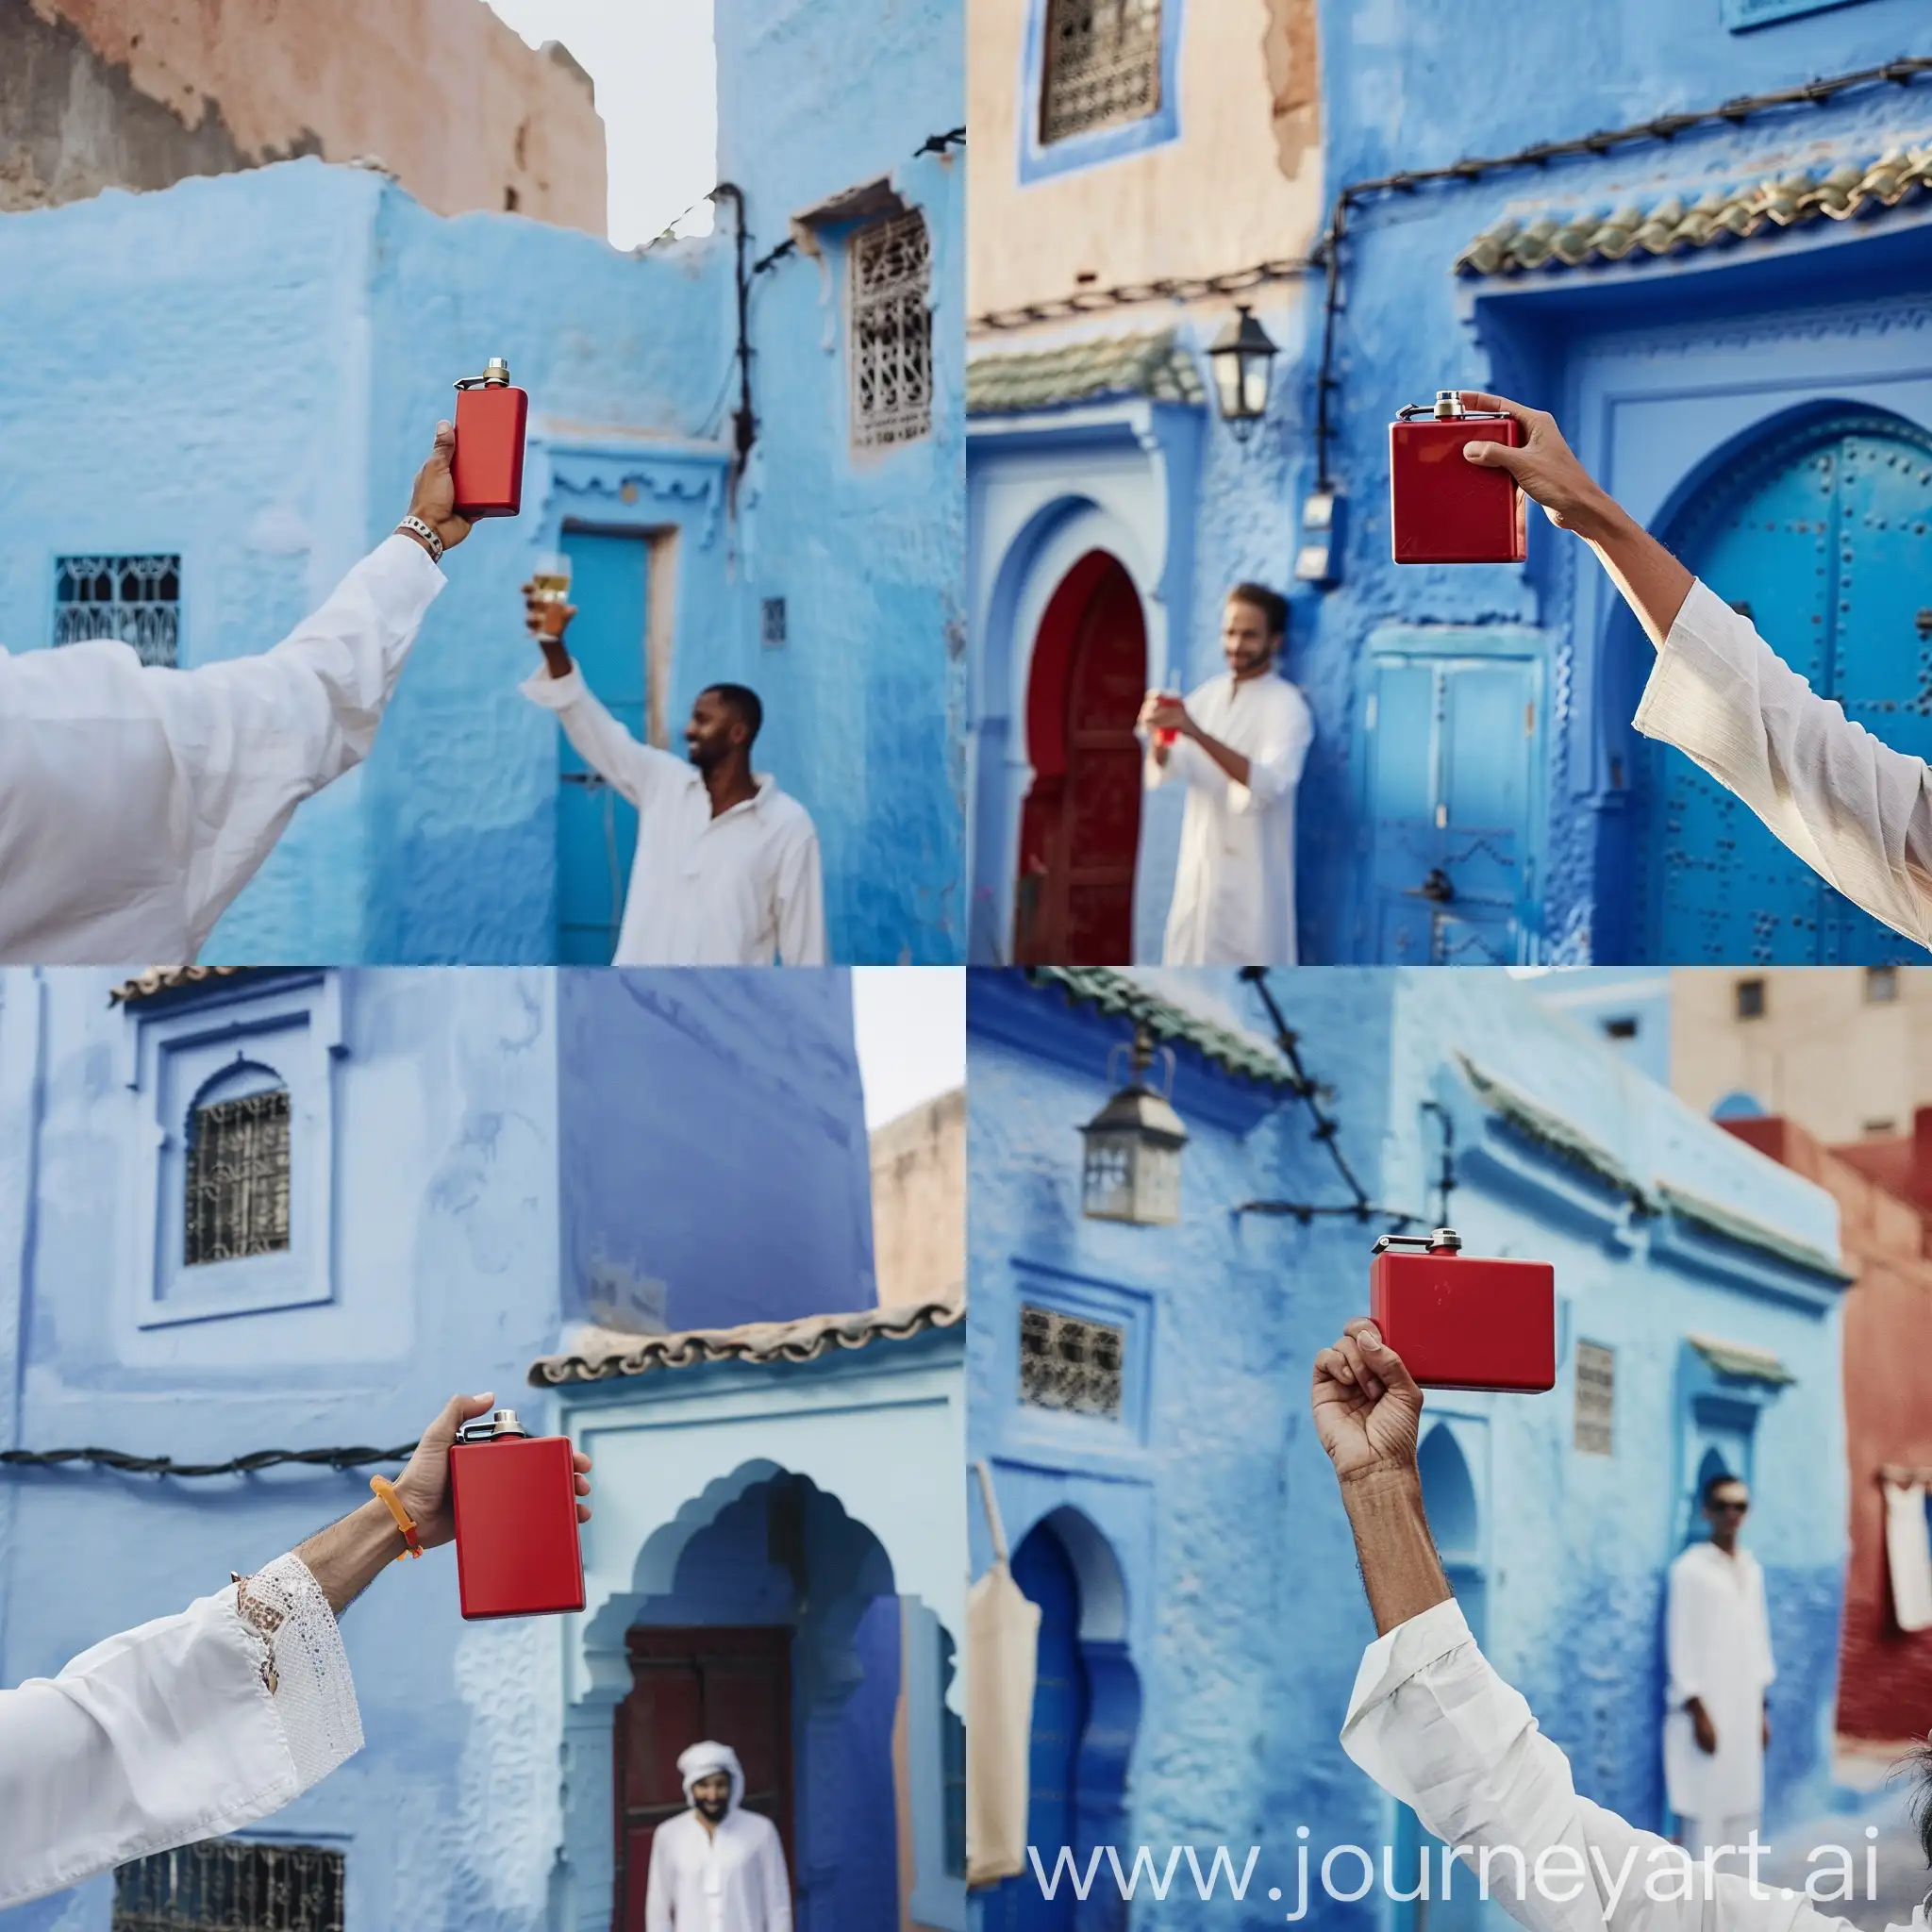 Celebratory-Toast-by-a-WhiteShirted-Figure-with-Red-Flask-Against-Moroccan-Blue-Building